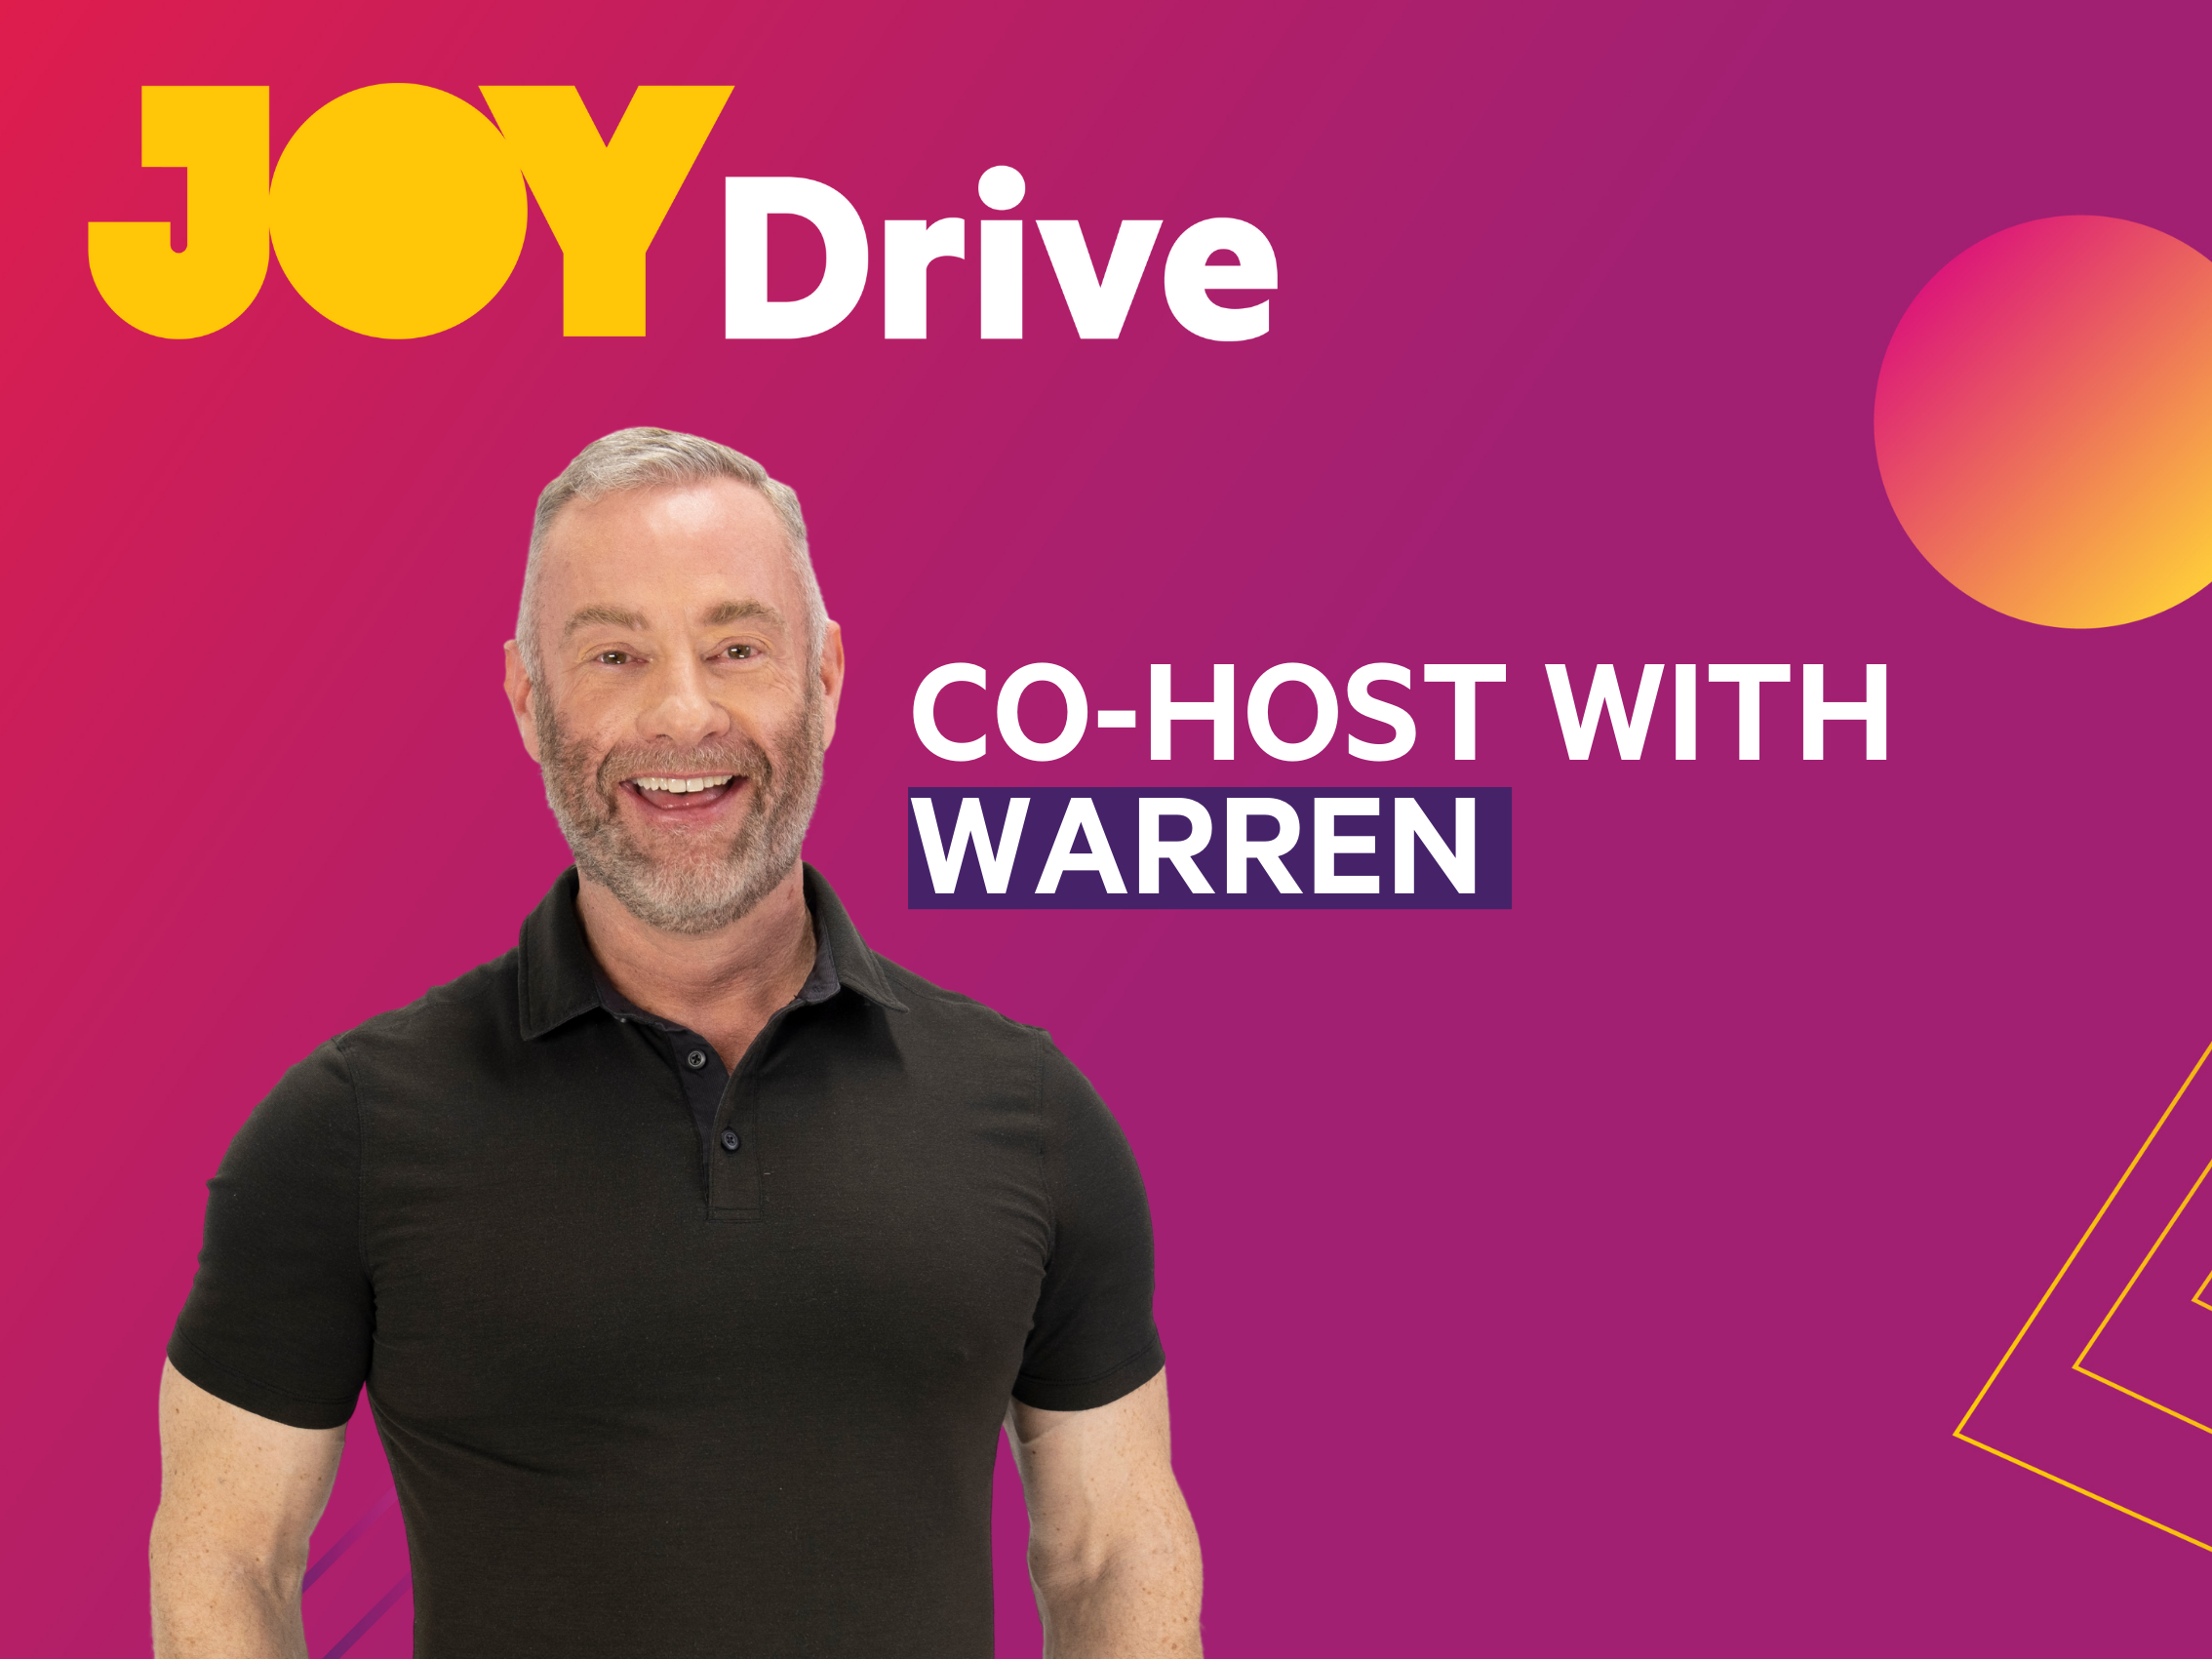 JOY is looking for a new Drive Co-Host!